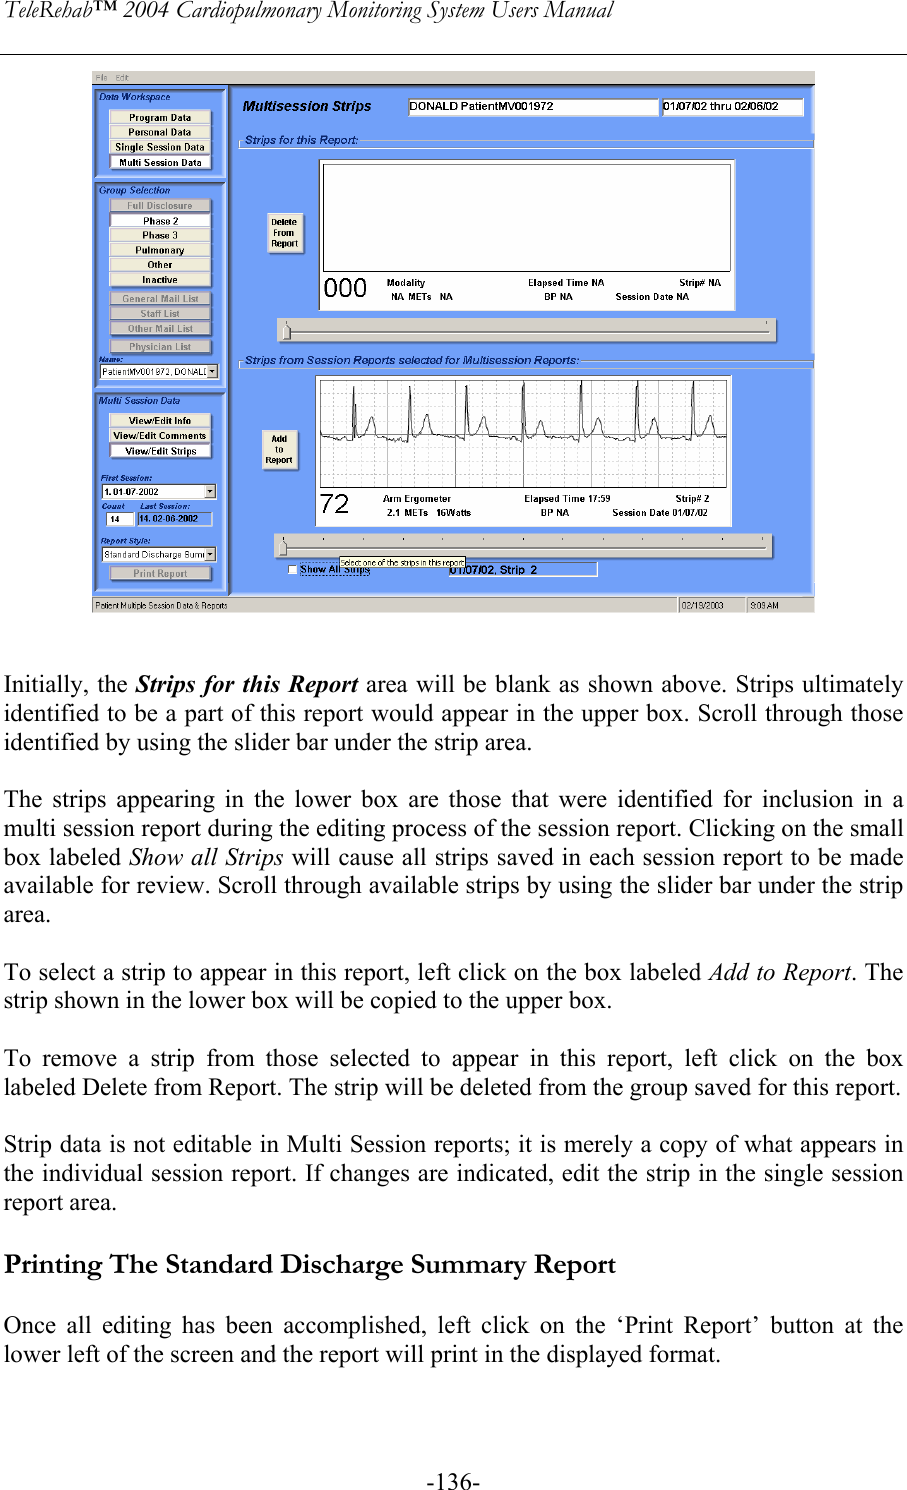 TeleRehab™ 2004 Cardiopulmonary Monitoring System Users Manual    -136-   Initially, the Strips for this Report area will be blank as shown above. Strips ultimately identified to be a part of this report would appear in the upper box. Scroll through those identified by using the slider bar under the strip area.  The strips appearing in the lower box are those that were identified for inclusion in a multi session report during the editing process of the session report. Clicking on the small box labeled Show all Strips will cause all strips saved in each session report to be made available for review. Scroll through available strips by using the slider bar under the strip area.  To select a strip to appear in this report, left click on the box labeled Add to Report. The strip shown in the lower box will be copied to the upper box.  To remove a strip from those selected to appear in this report, left click on the box labeled Delete from Report. The strip will be deleted from the group saved for this report.  Strip data is not editable in Multi Session reports; it is merely a copy of what appears in the individual session report. If changes are indicated, edit the strip in the single session report area.  Printing The Standard Discharge Summary Report  Once all editing has been accomplished, left click on the ‘Print Report’ button at the lower left of the screen and the report will print in the displayed format.  